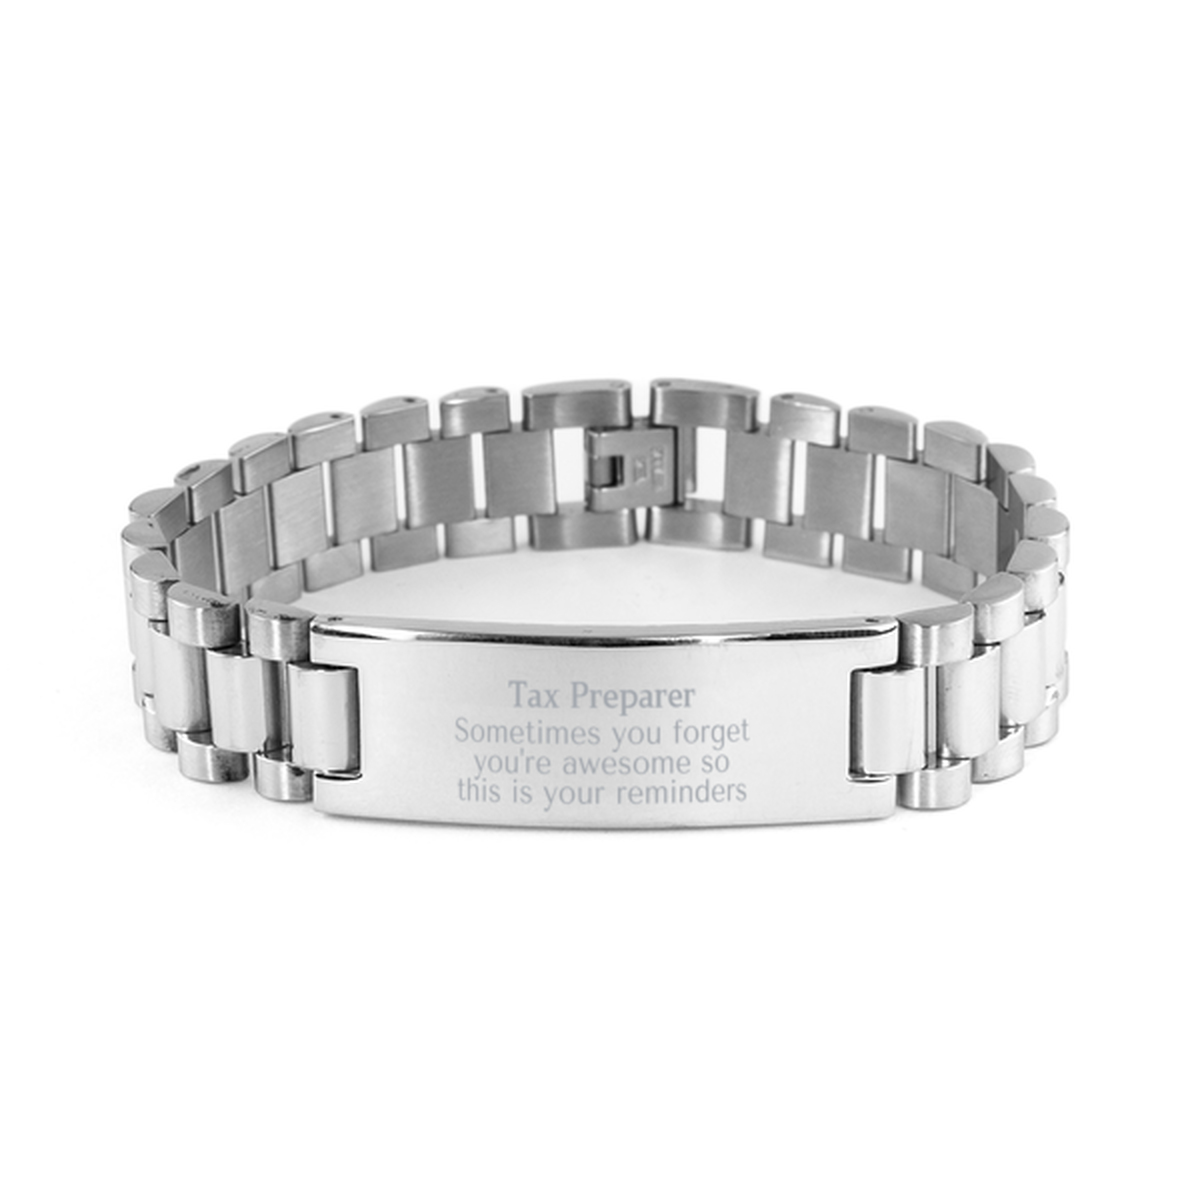 Sentimental Tax Preparer Ladder Stainless Steel Bracelet, Tax Preparer Sometimes you forget you're awesome so this is your reminders, Graduation Christmas Birthday Gifts for Tax Preparer, Men, Women, Coworkers